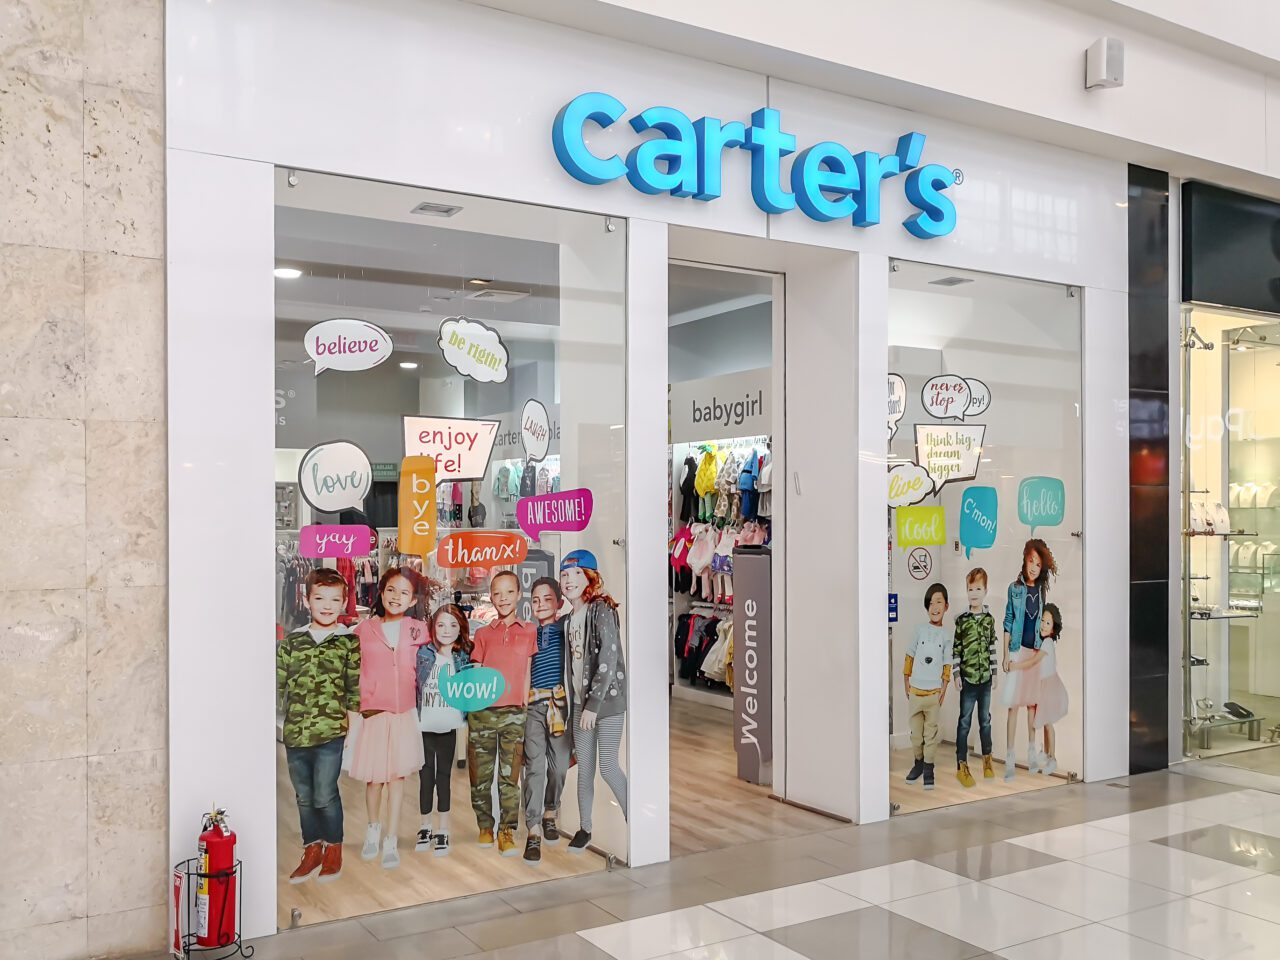 Carter's plans to open 50 new stores this year.